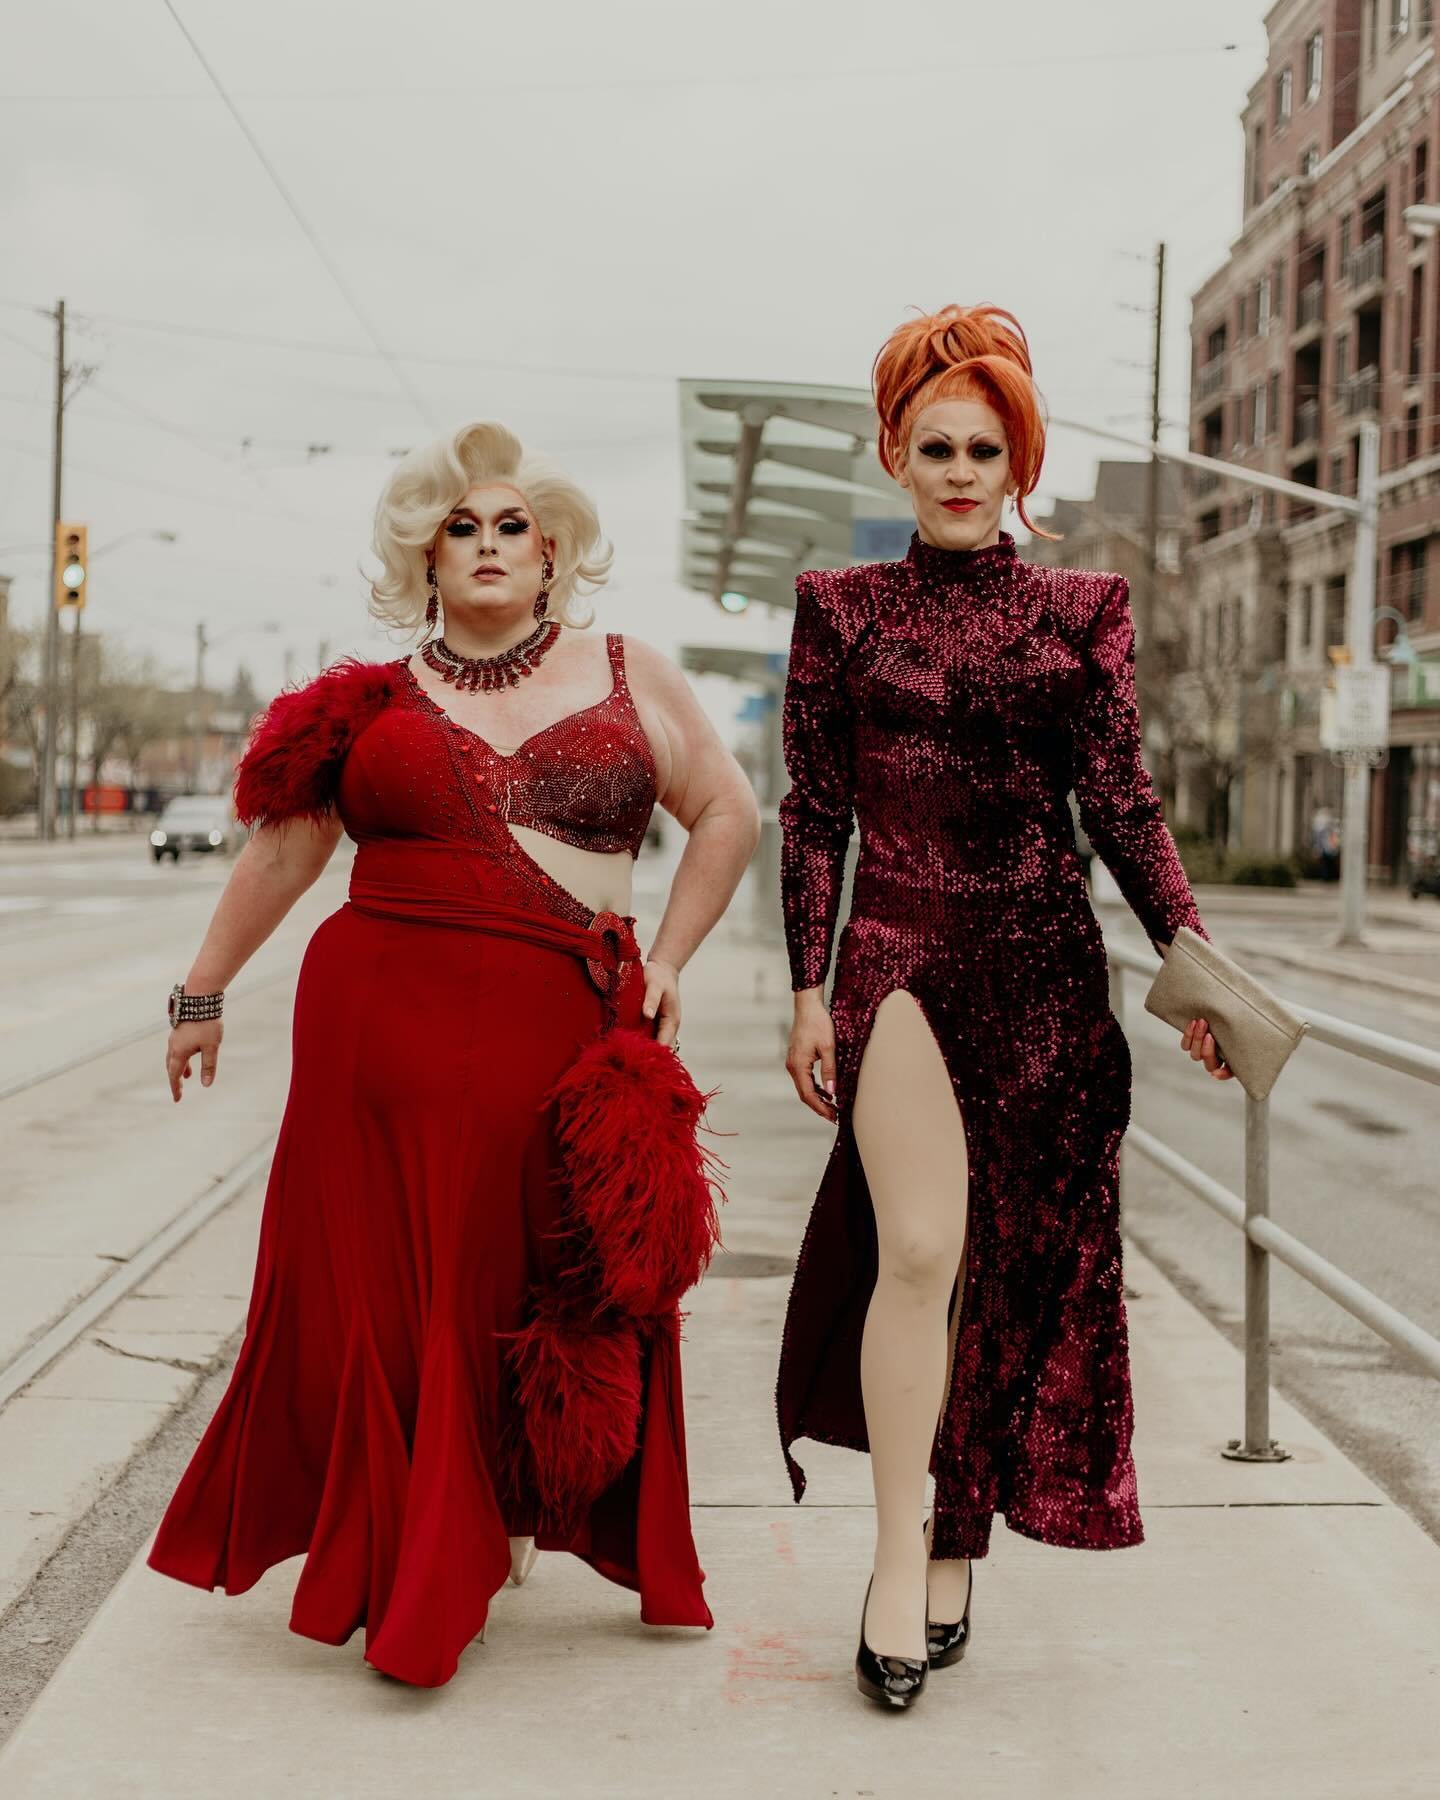 She &ldquo;red&rdquo; me the whole time. 

@carlottacarlisle 
@lb_socialhouse 

📸 @stefcaughtyou 

#dragqueenshow #dragbrunch #dragshow #torontodrag #dragqueentoronto